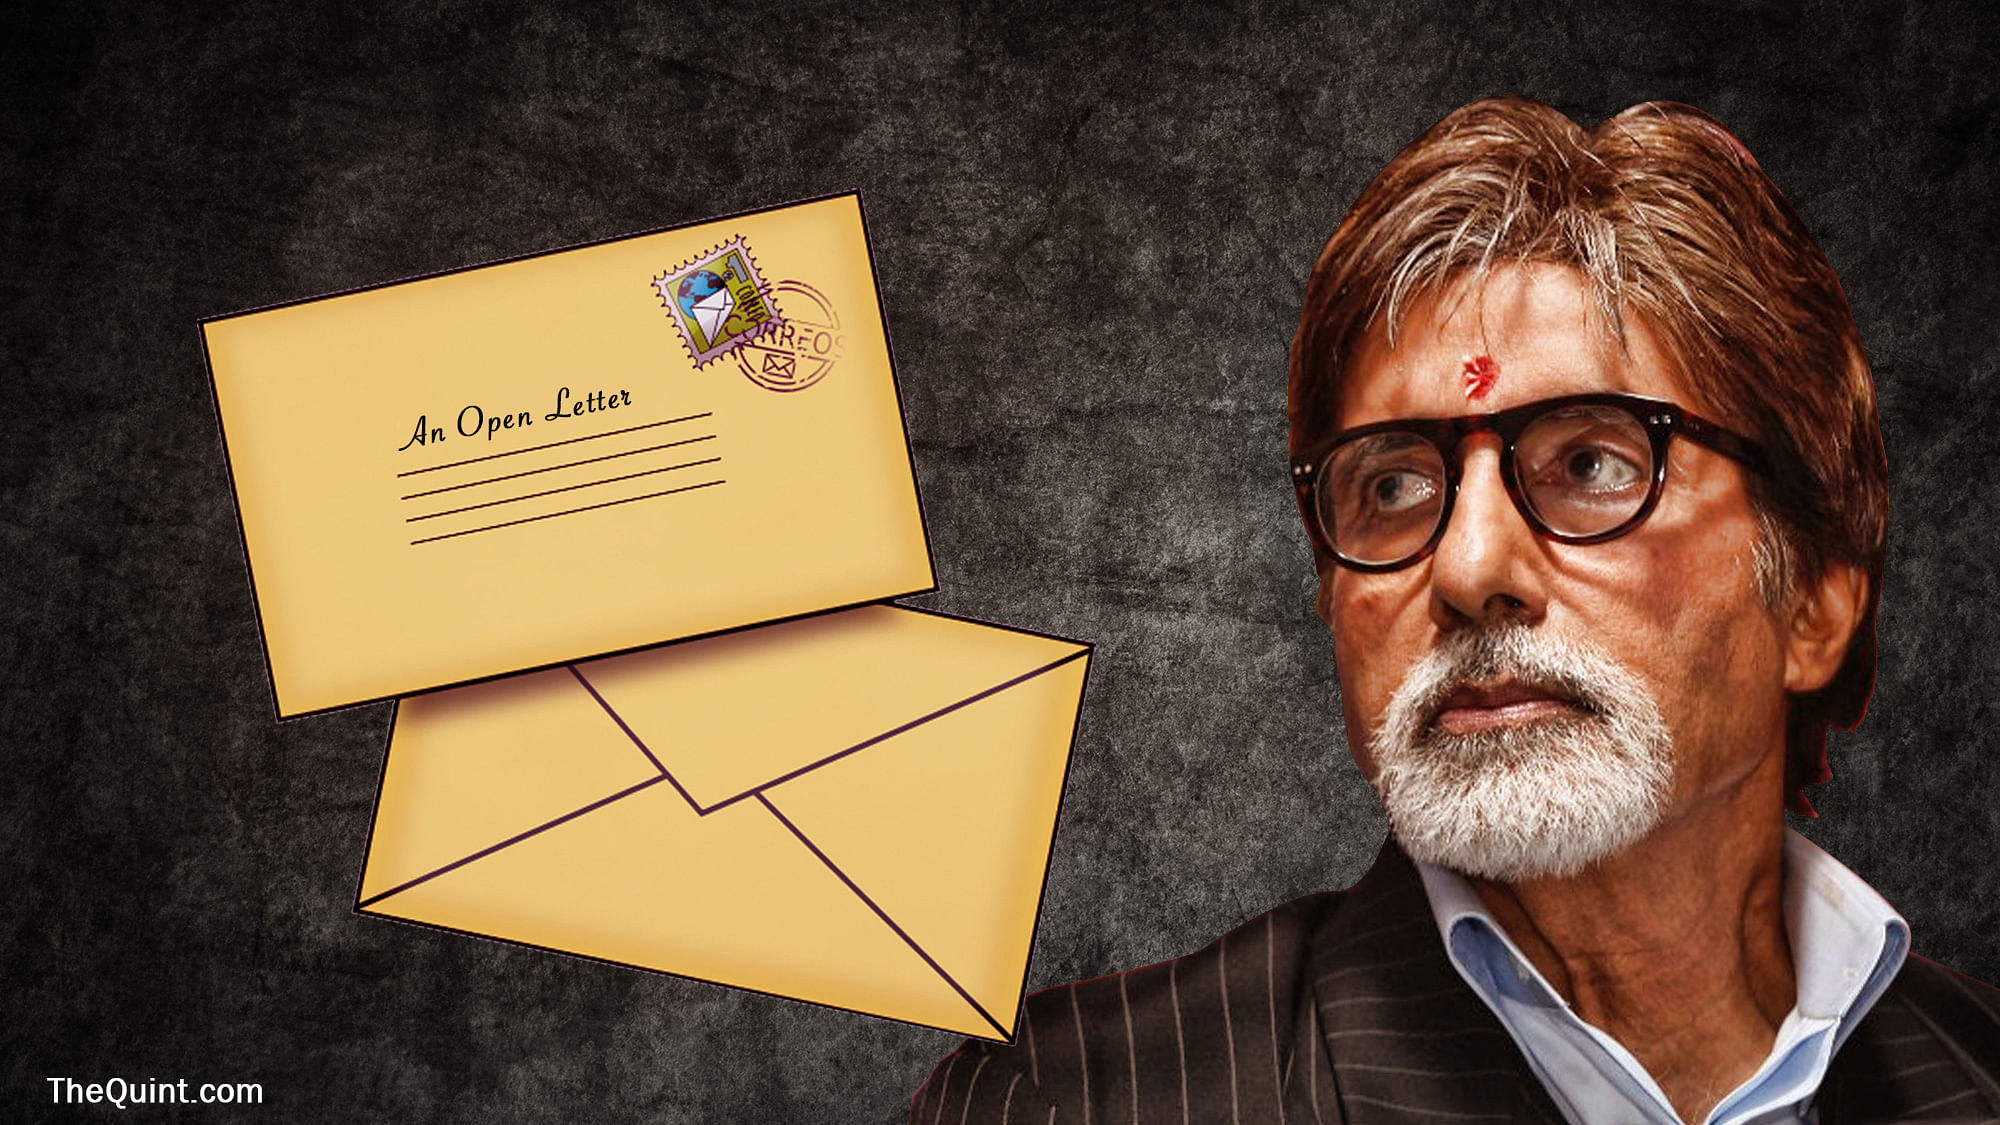 Amitabh Bachchan writes down his thoughts for his grandkids, and we have some thoughts on this. (Photo: Liju Joseph/The Quint)